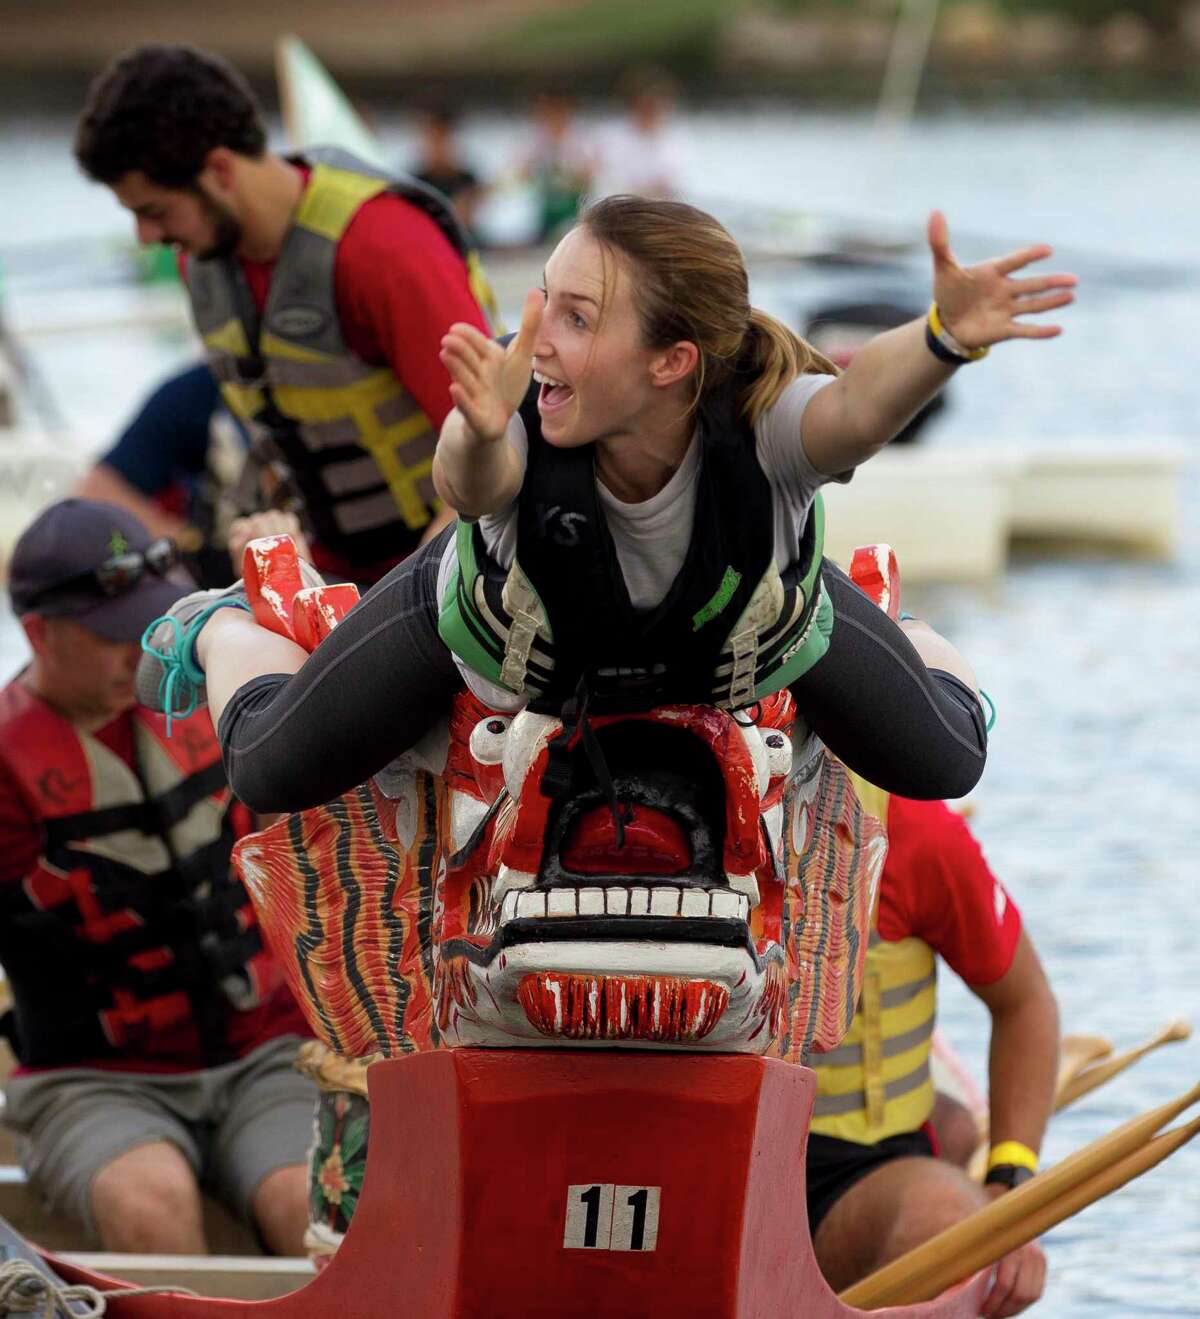 Kendra Williamson reacts as she tries to balance on the end of a dragon boat while grabbing a flag during the annual YMCA Dragon Boat Team Challenge Thursday, Sept. 28, 2017, at Northshore Park in The Woodlands. Under proposed changes to the park use fee waiver process, the YMCA Dragon Boat Races could lose the $4,800 in waived fees in the future. Officials have said if they do lose the waiver, the event will still continue to occur.